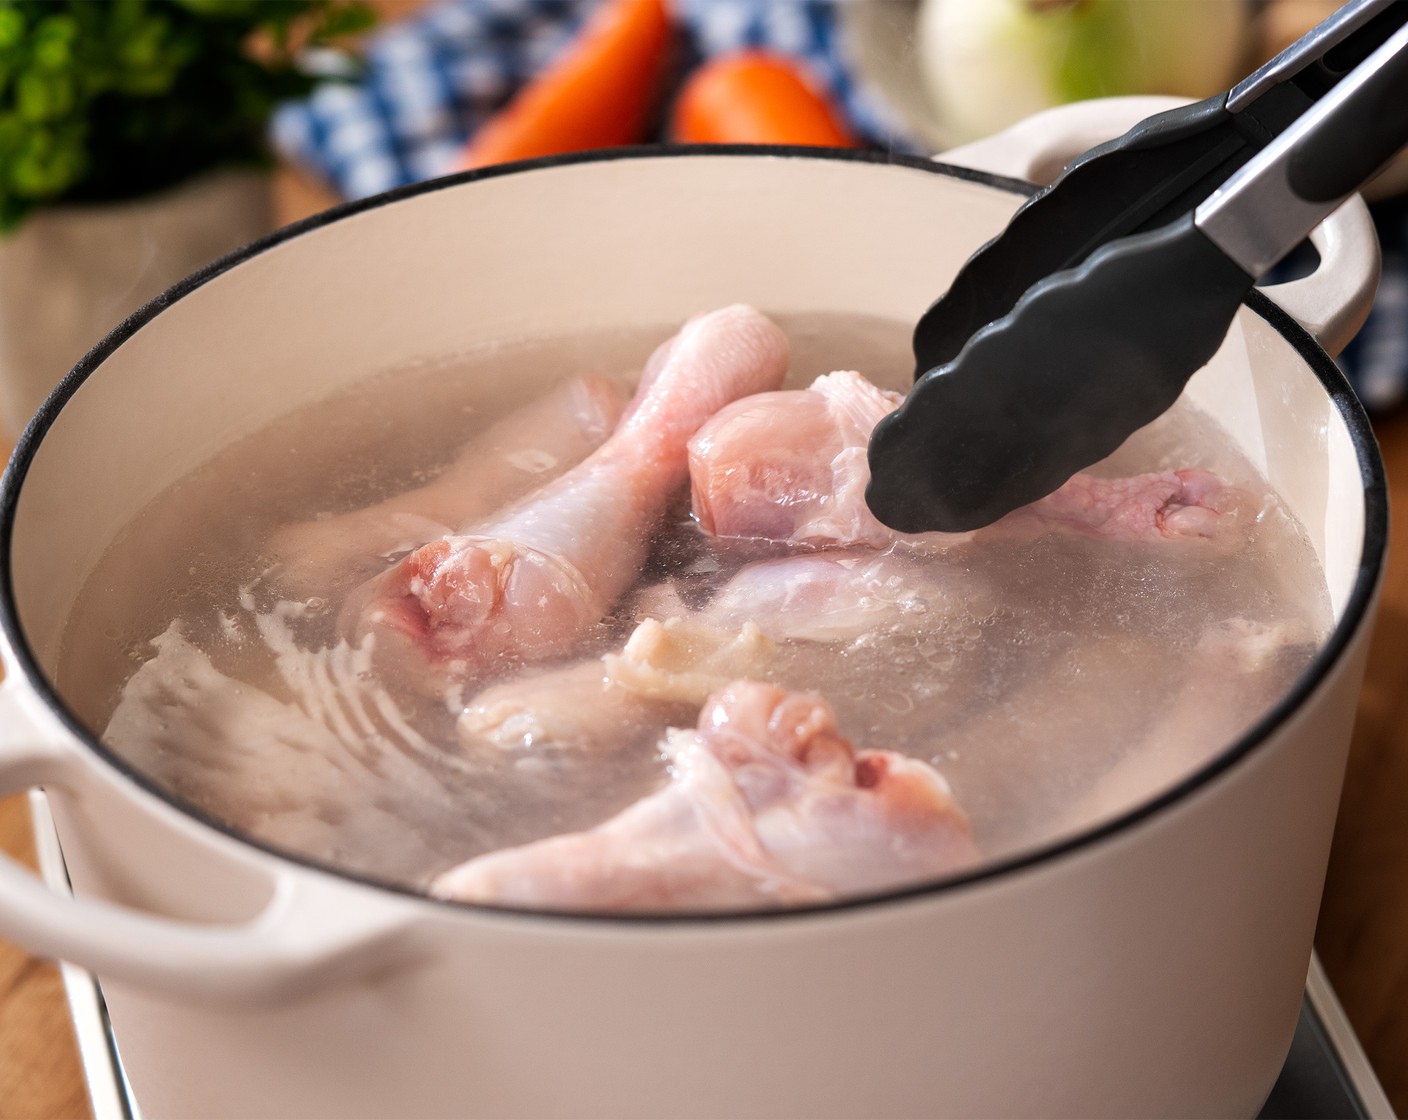 step 3 Blanch the chicken in boiling water for 2 minutes. Drain and rinse the chicken with clean running water.